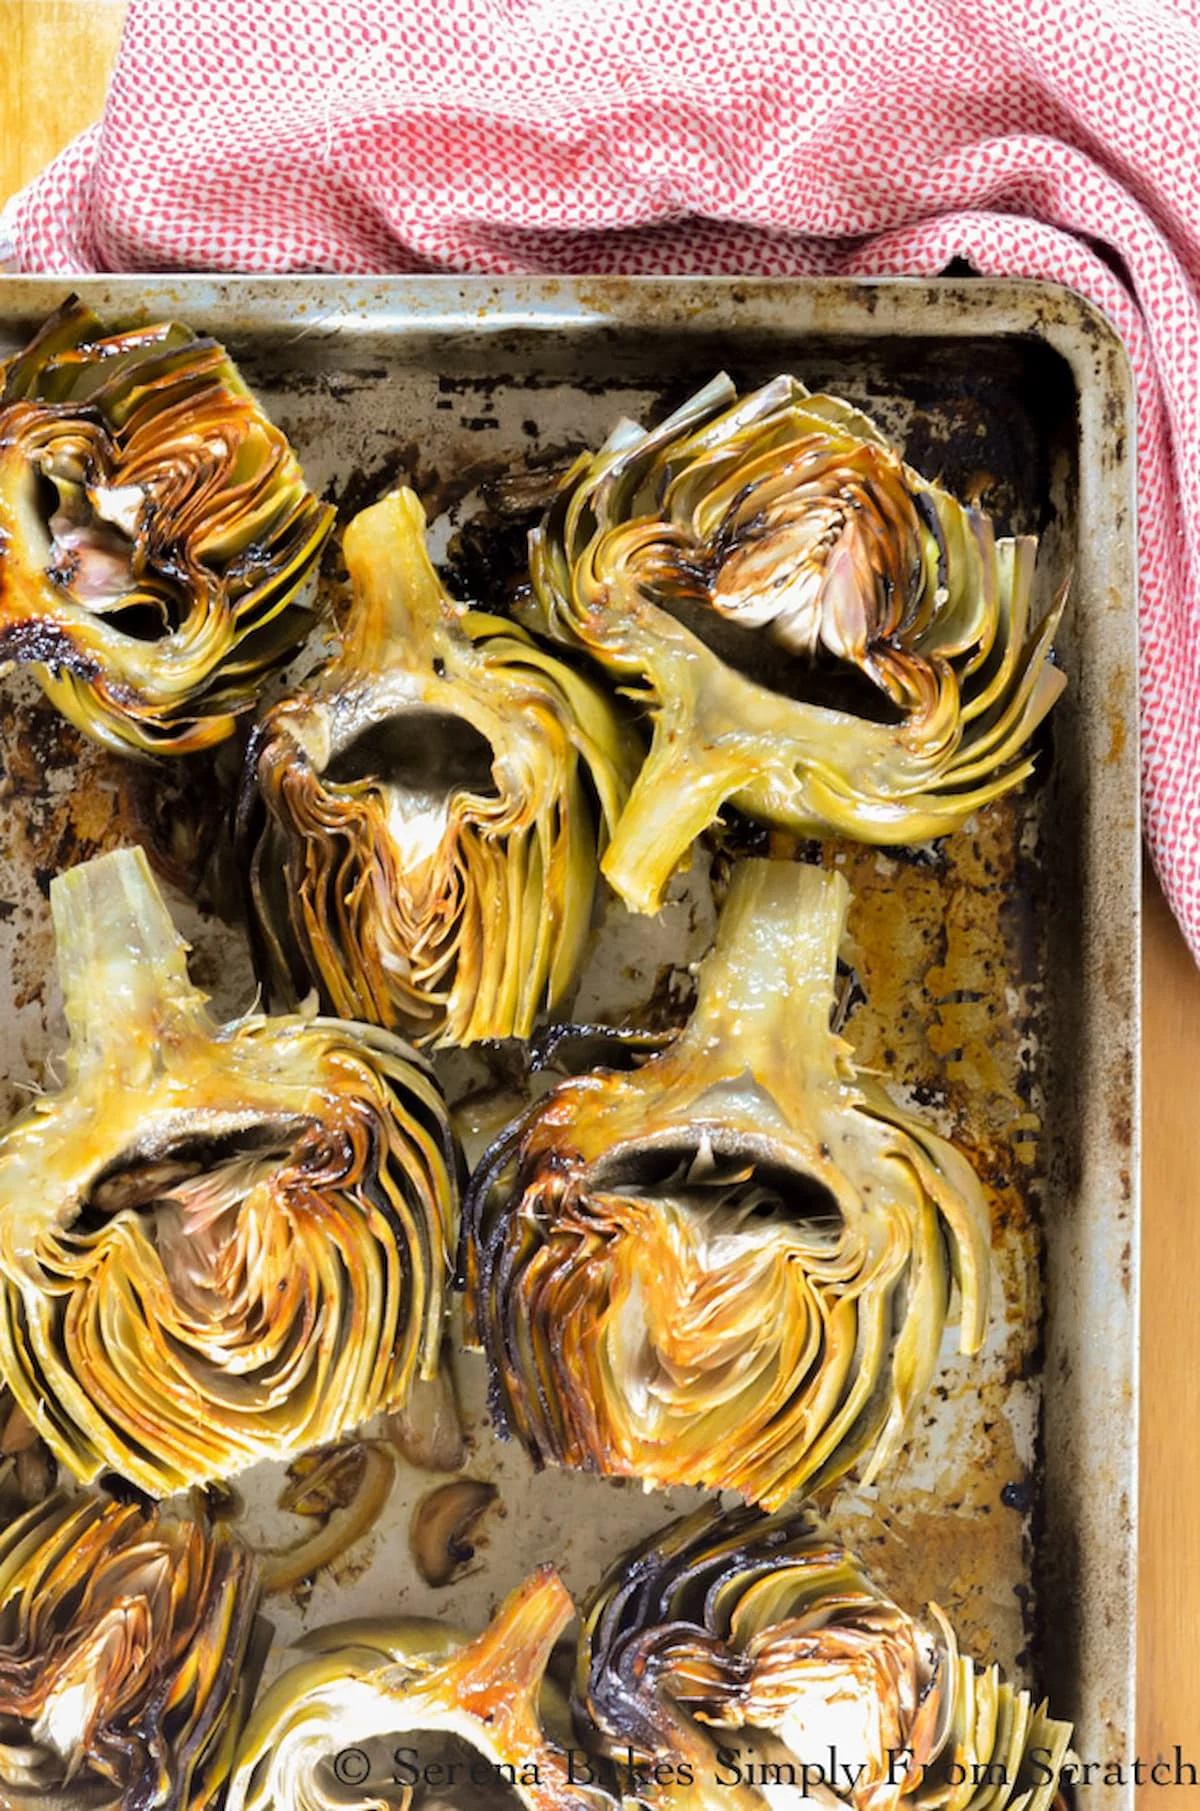 Roasted Artichokes with garlic on a baking tray with cut lemon.